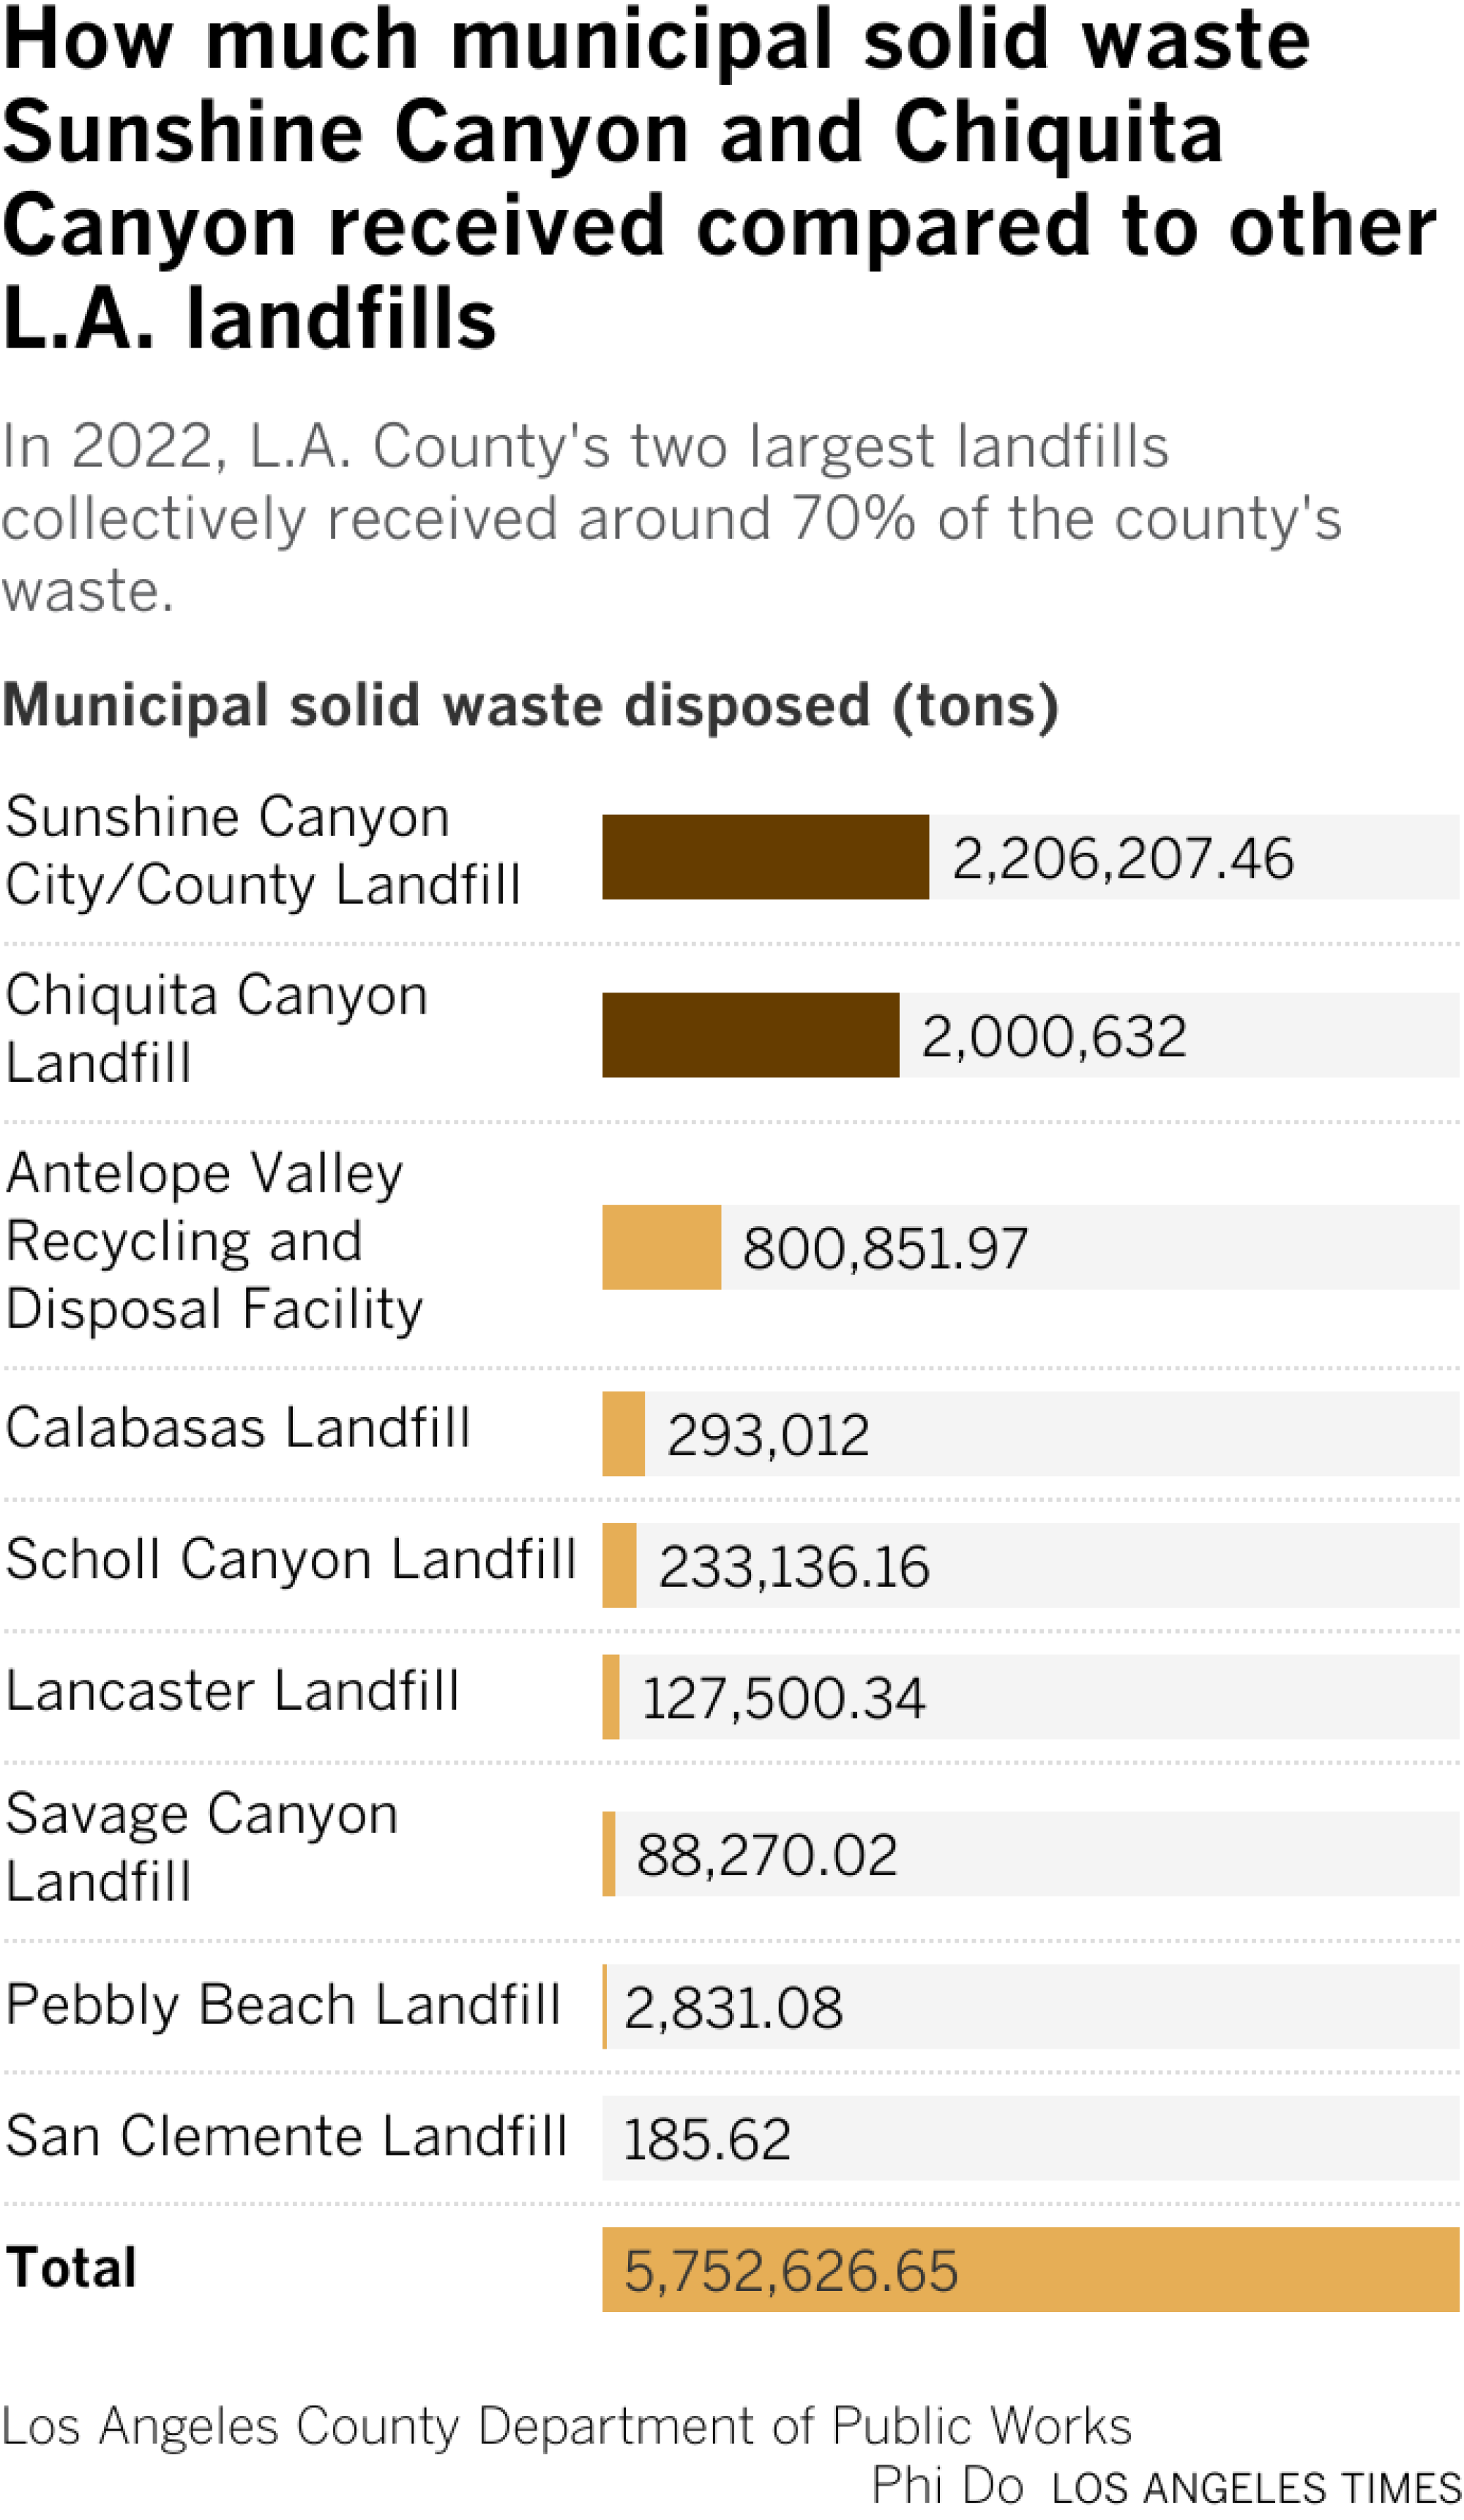 In 2022, L.A. County's two largest landfills collectively received around 70% of the county's waste.